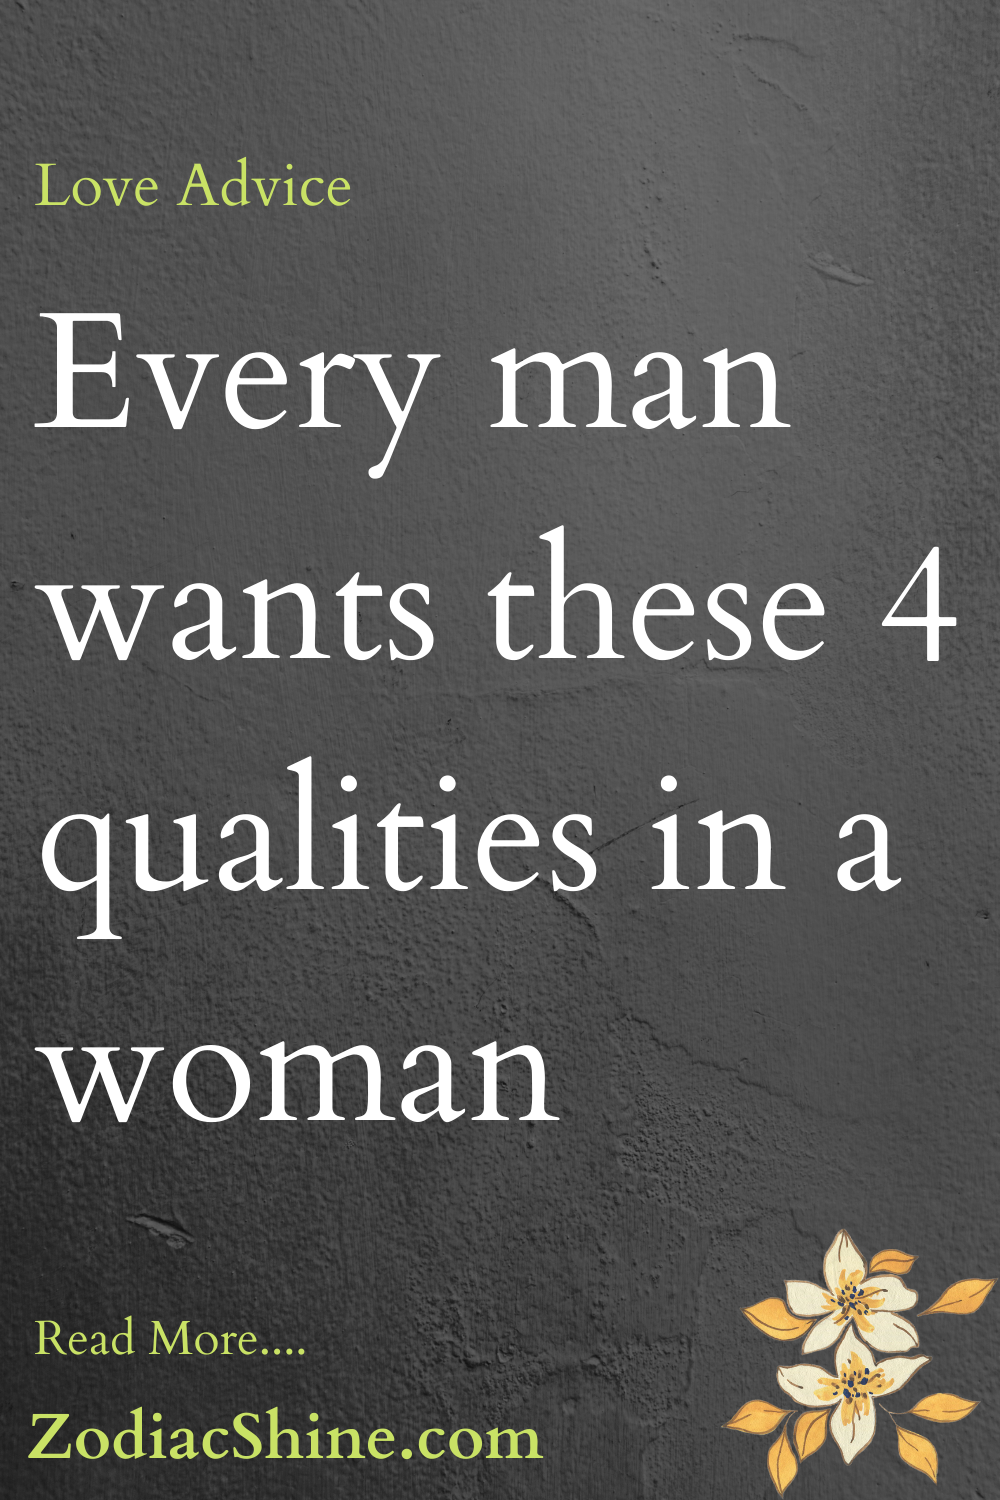 Every man wants these 4 qualities in a woman